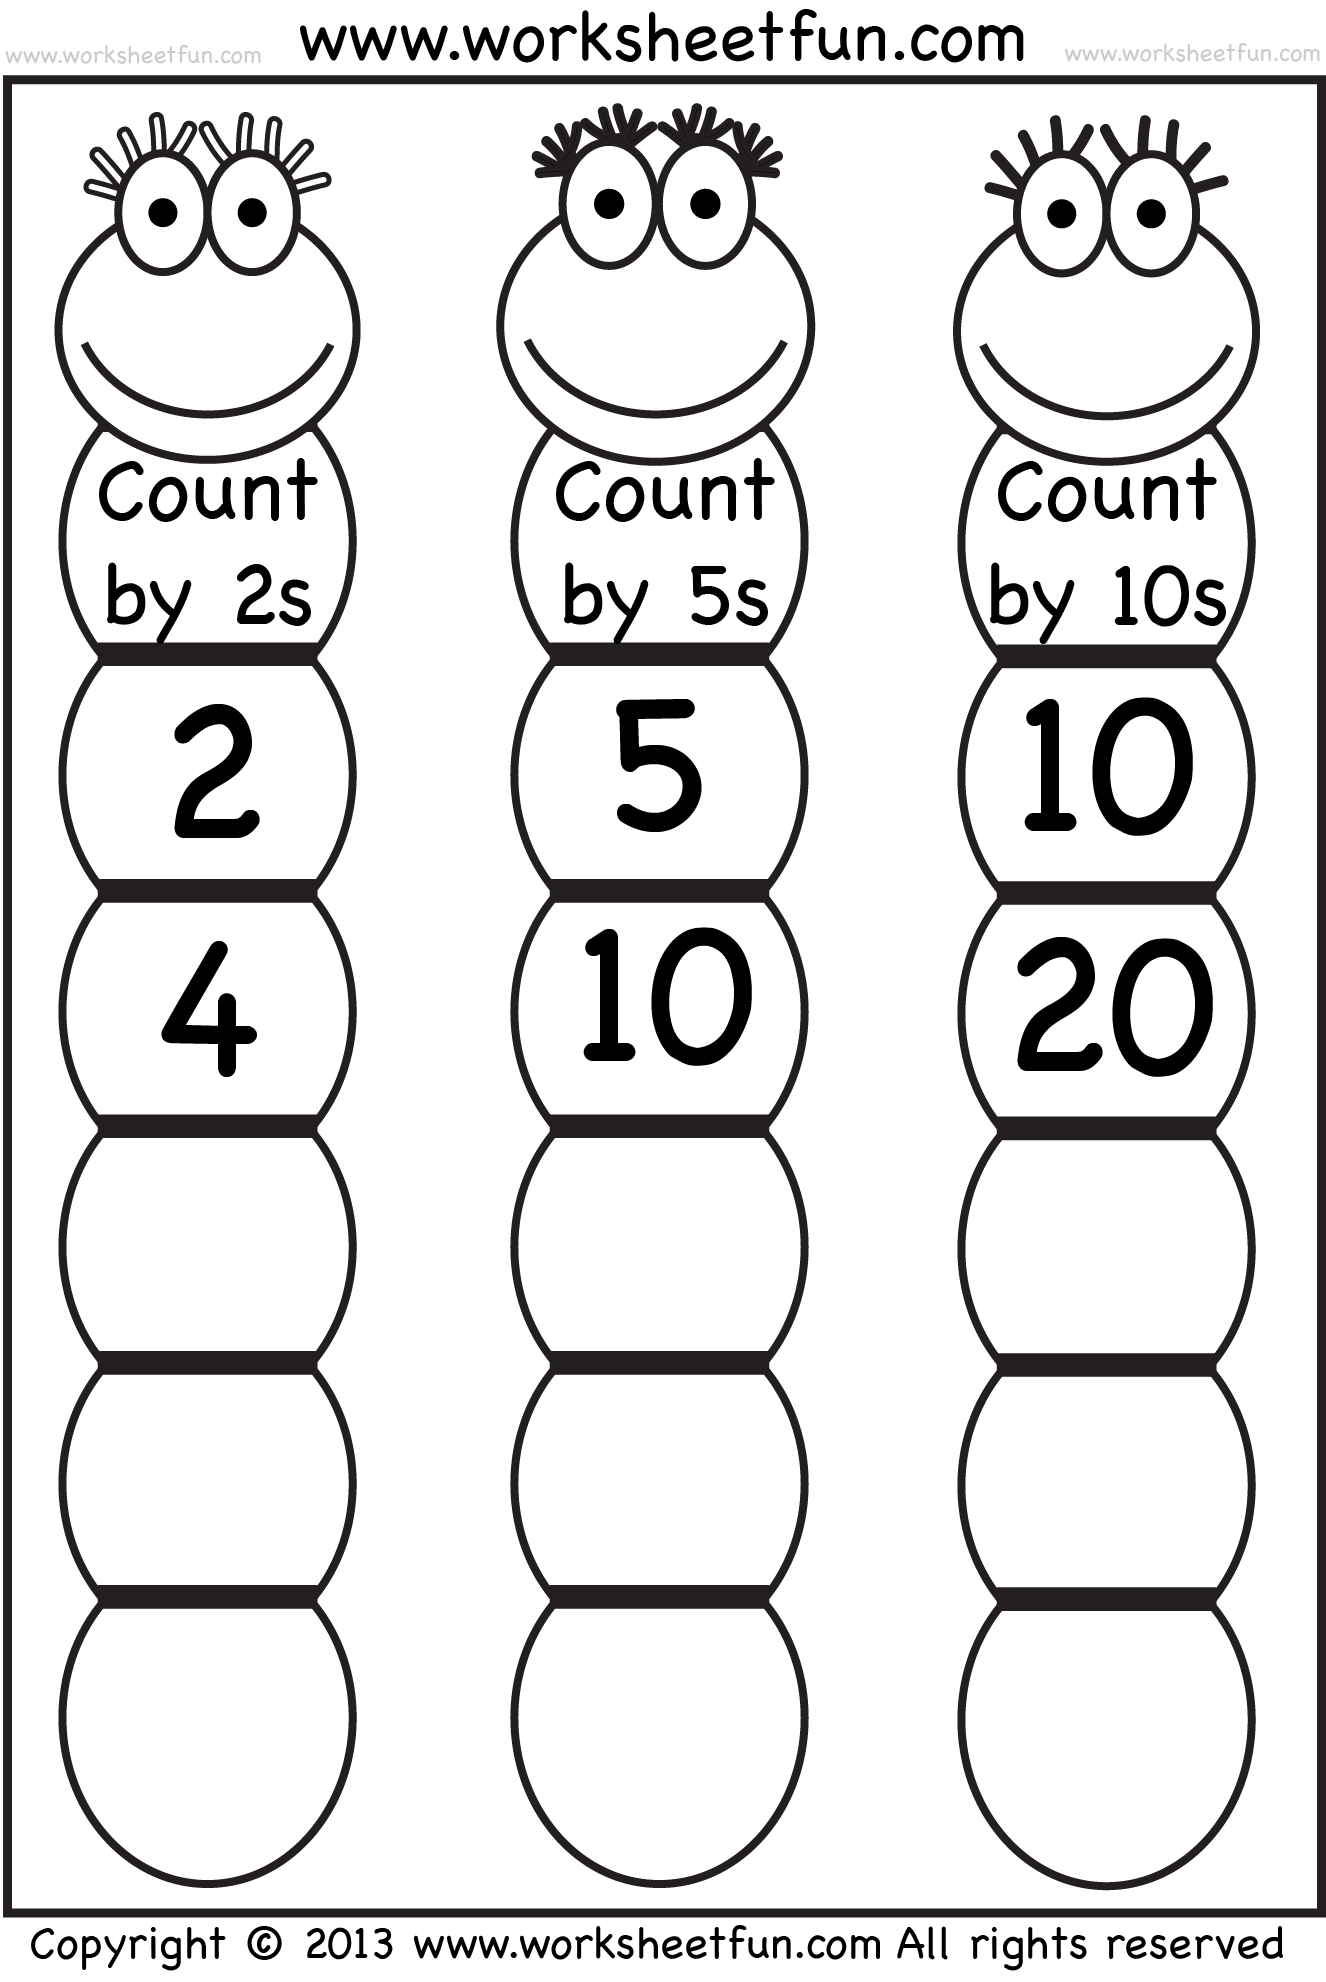 Skip Counting by 11, 11 and 11 – Worksheet / FREE Printable Intended For Count By 5s Worksheet